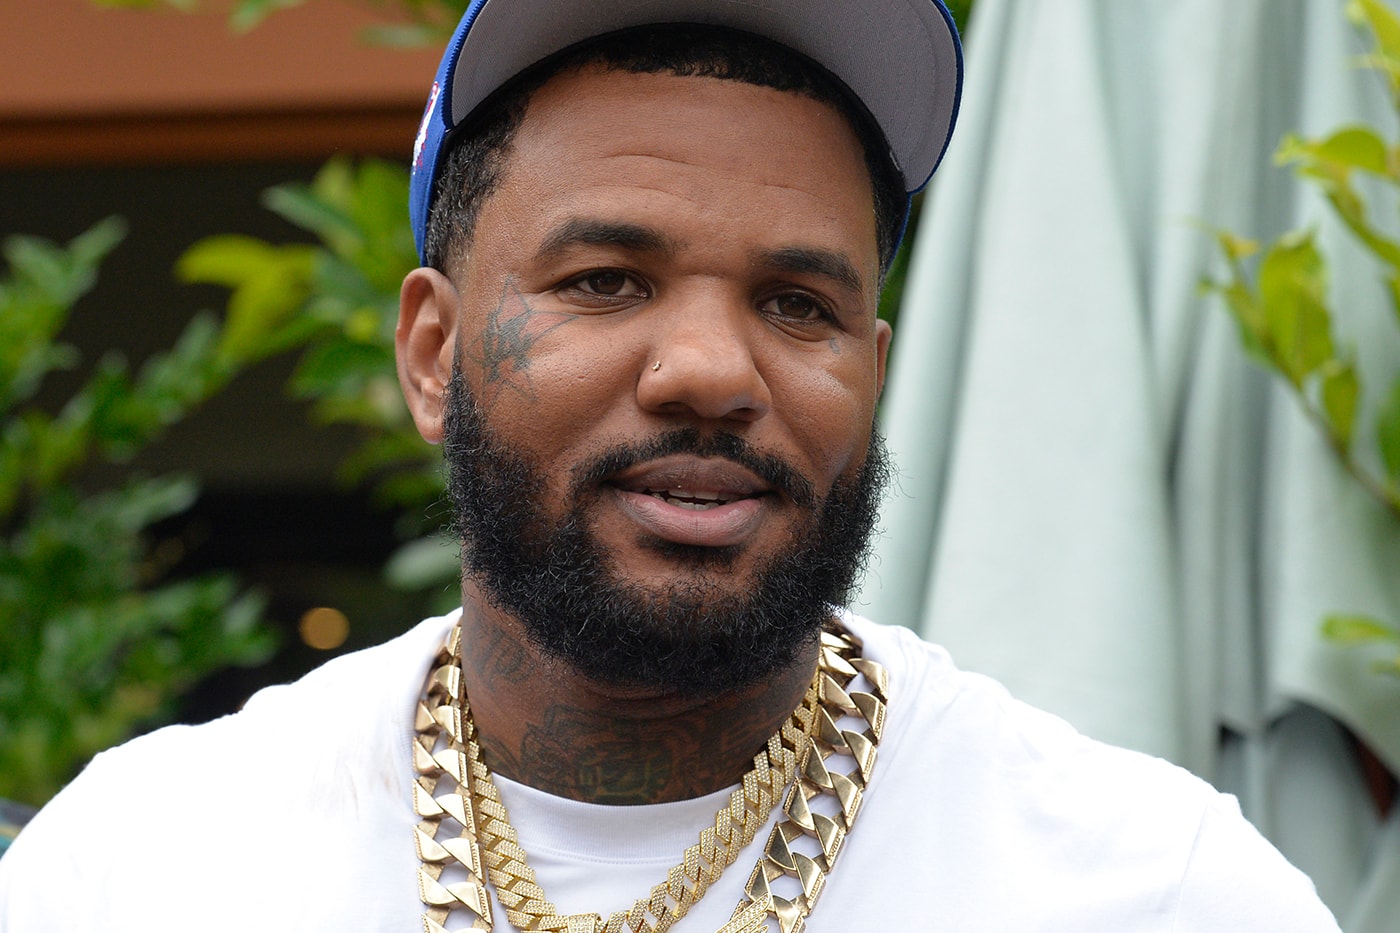 The Game hit boy produced Drillmatic new Album Release Date announcement